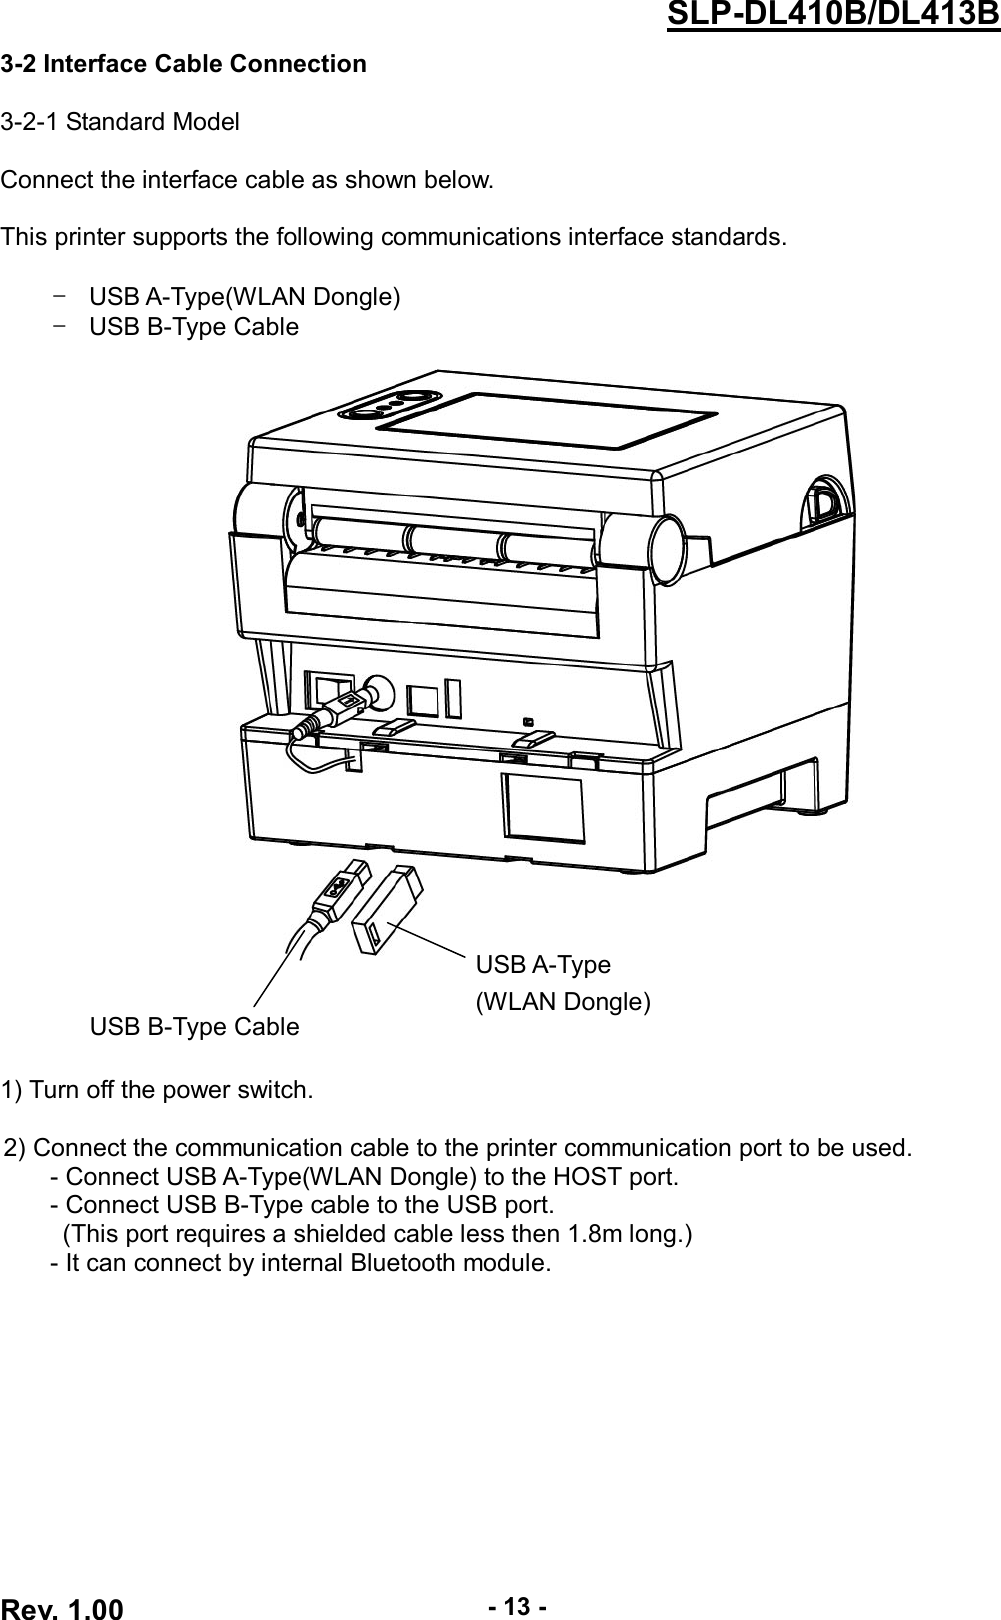  Rev. 1.00 - 13 - SLP-DL410B/DL413B 3-2 Interface Cable Connection  3-2-1 Standard Model  Connect the interface cable as shown below.  This printer supports the following communications interface standards.  -  USB A-Type(WLAN Dongle) -  USB B-Type Cable            1) Turn off the power switch.  2) Connect the communication cable to the printer communication port to be used. - Connect USB A-Type(WLAN Dongle) to the HOST port. - Connect USB B-Type cable to the USB port. (This port requires a shielded cable less then 1.8m long.) - It can connect by internal Bluetooth module.    USB B-Type Cable USB A-Type (WLAN Dongle) 